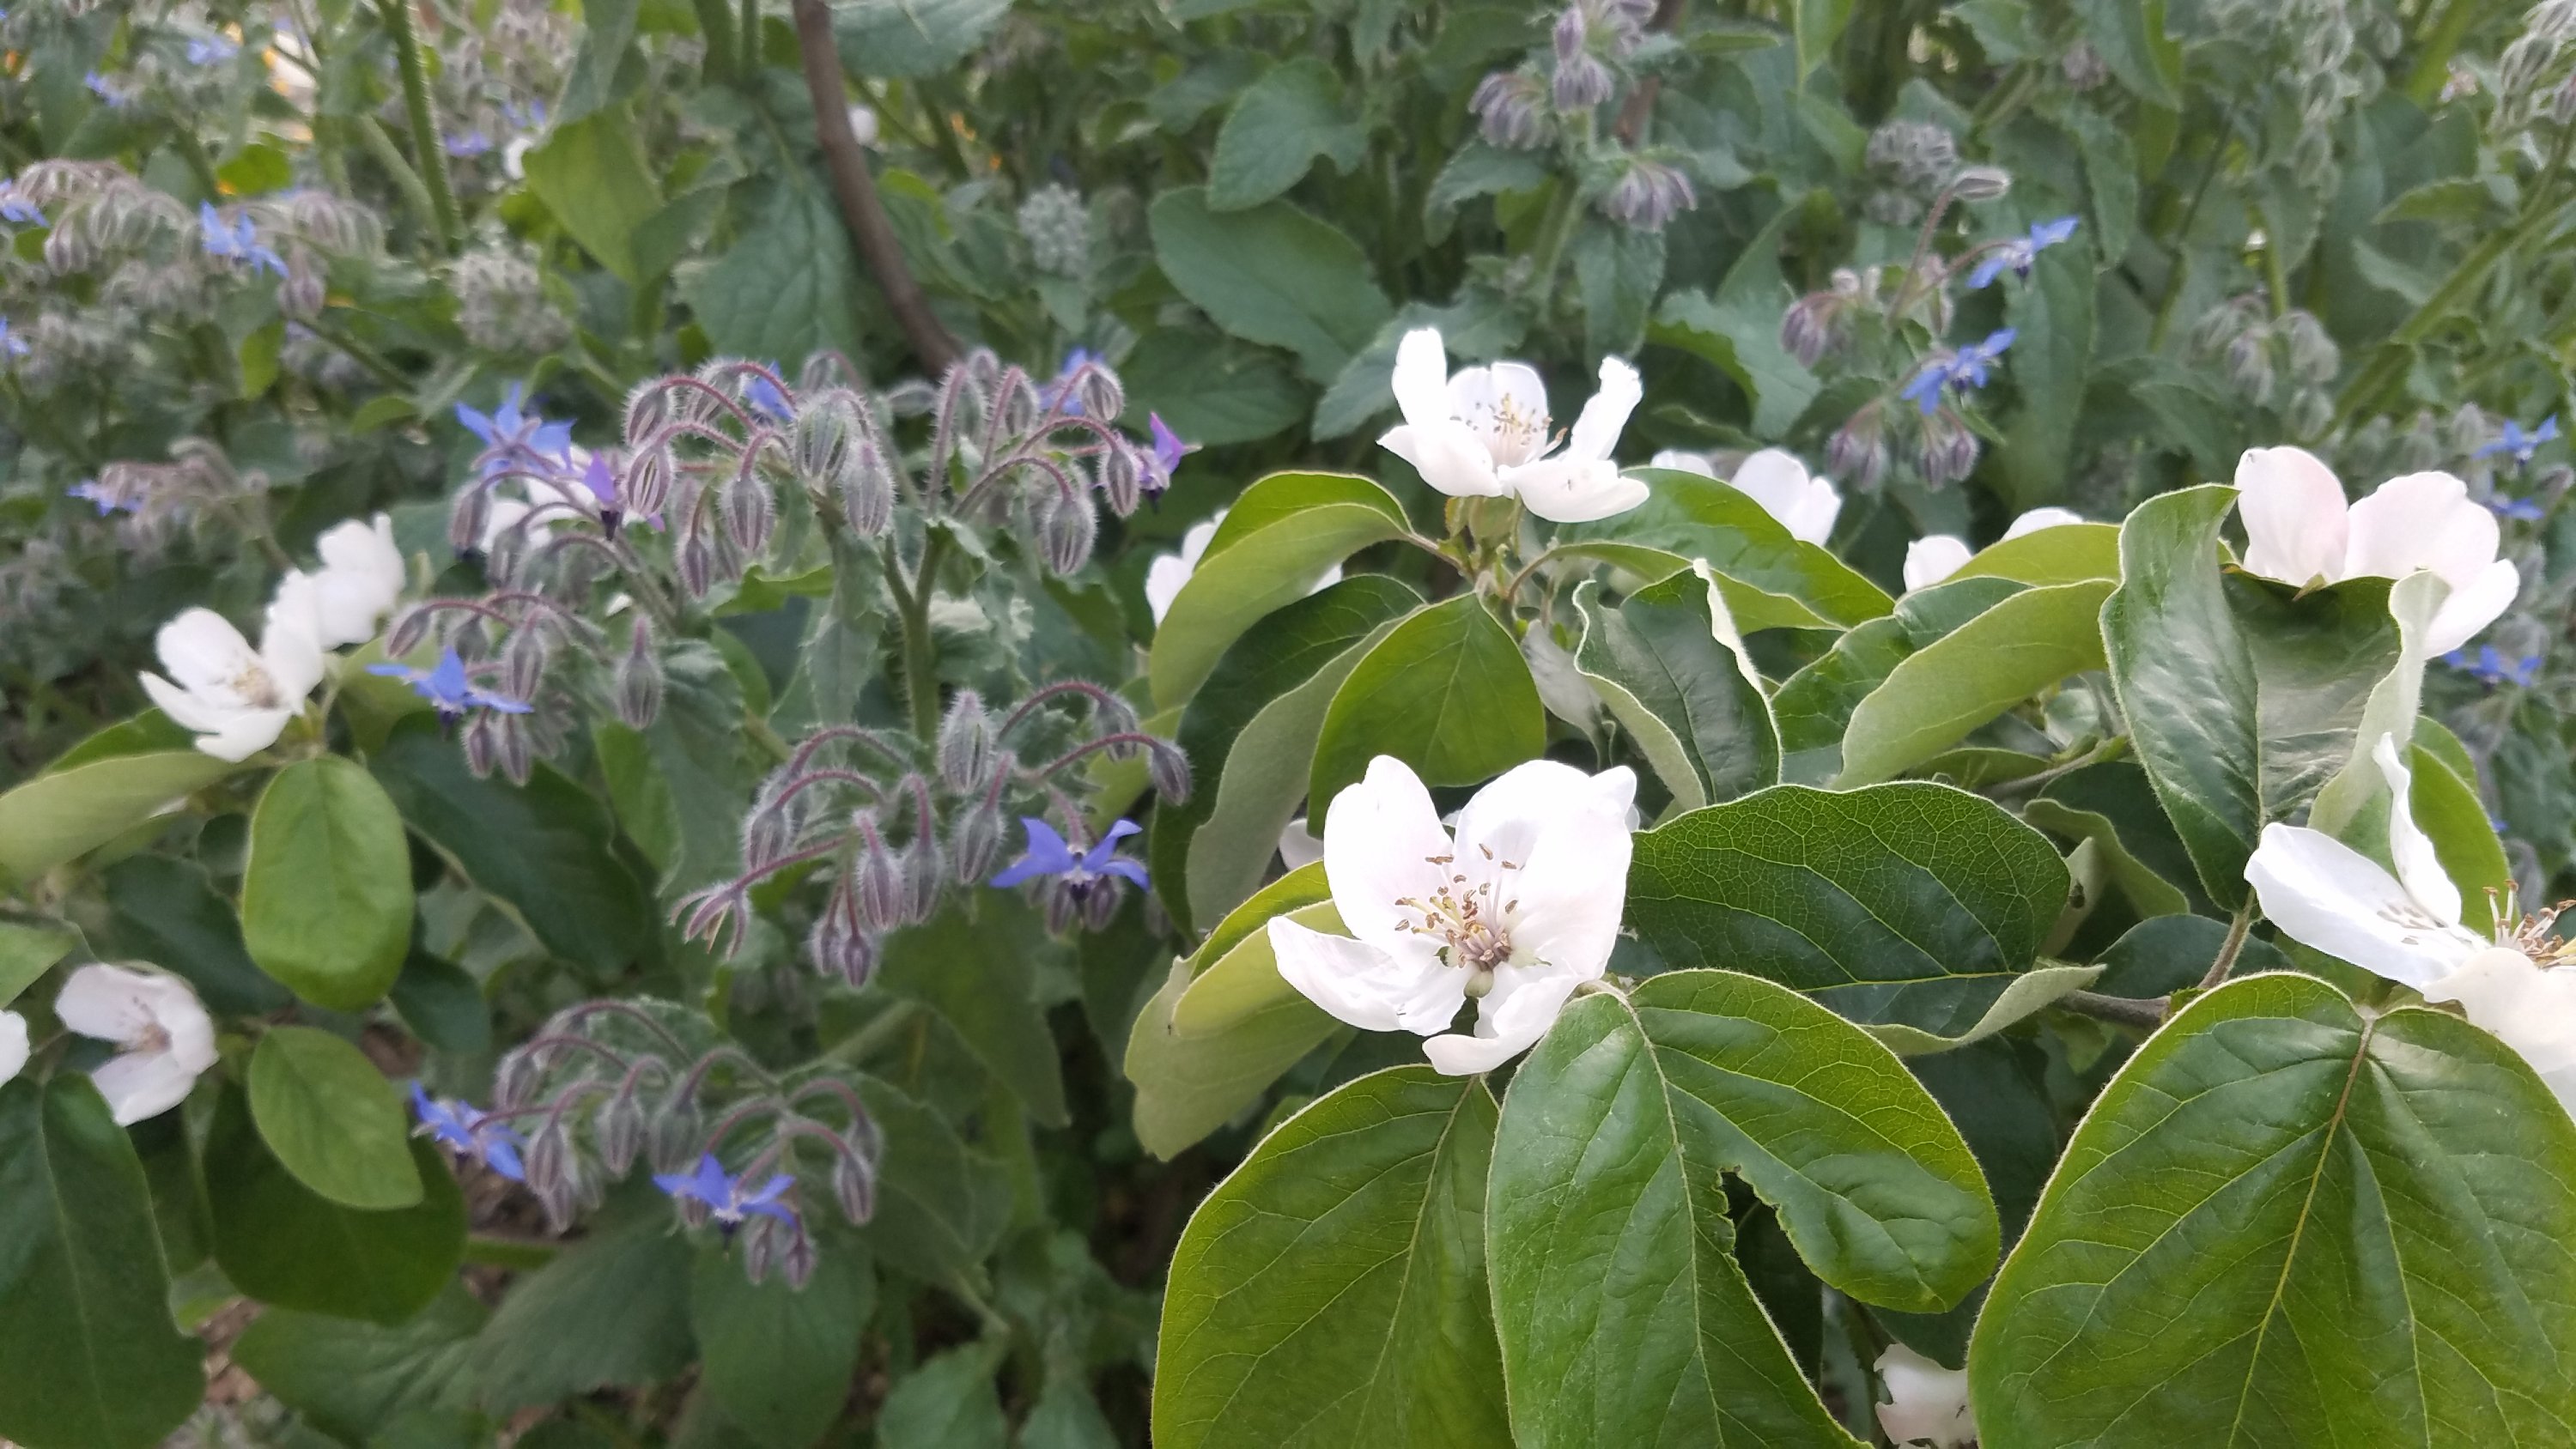 White quince flowers and leaves intermingled with purple borage flowers in a garden setting.